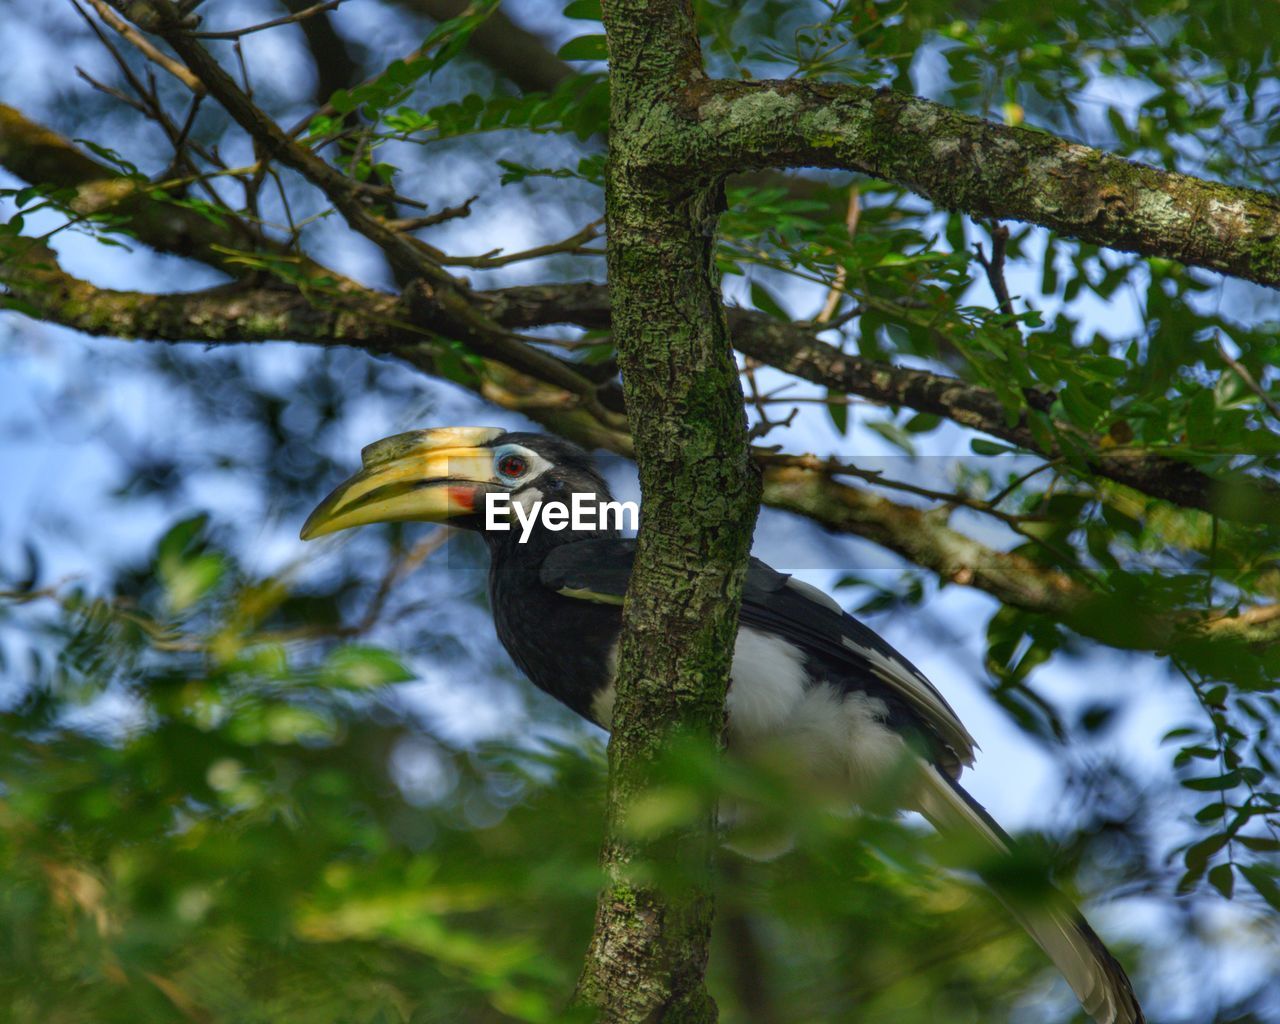 This oriental pied hornbill is a resident at the seletar arrospace park here is singapore.